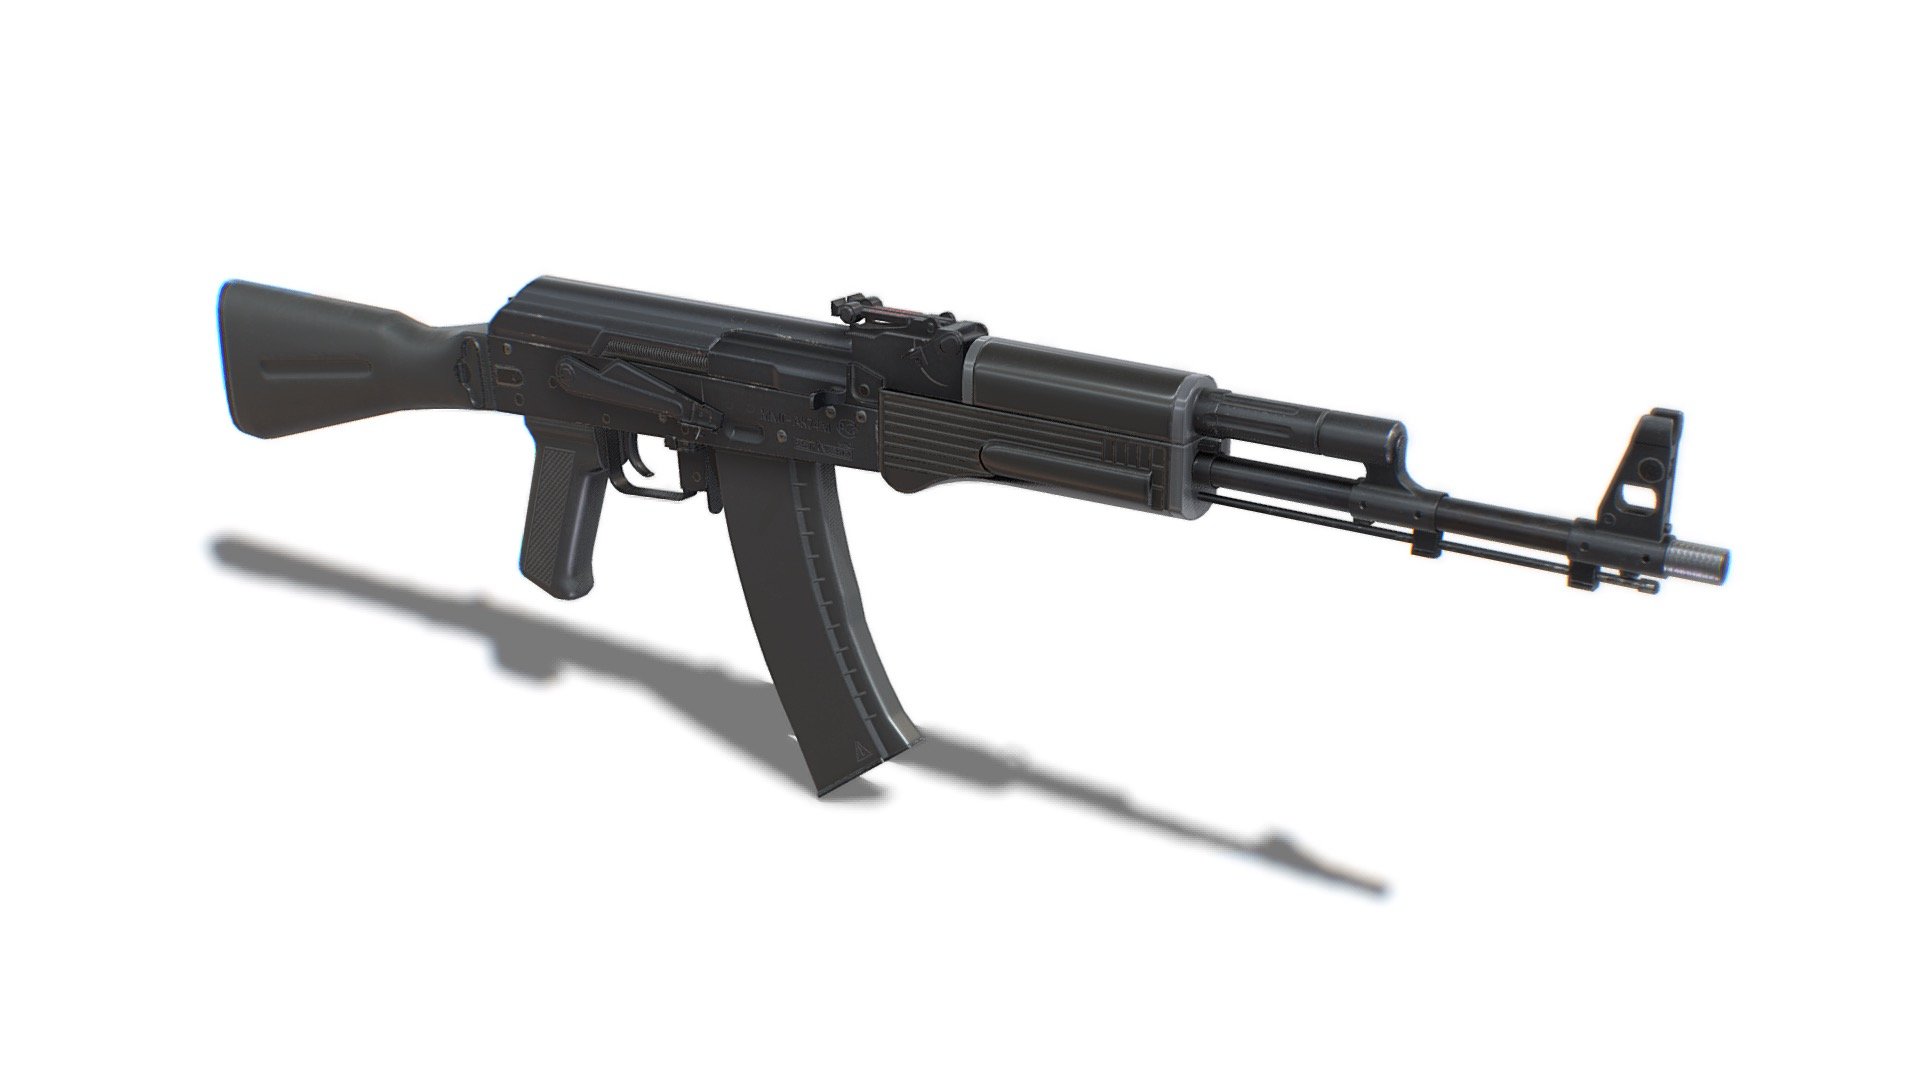 The model looks like an Assault Rifle АК-74М. All parts of the model were made in full accordance with the original. Each dynamical part is separated and has correct pivot points, that allow easy animation and use in games. 

Advanced information:
- single material for whole mesh;
- set of 4K PBR textures;
- set of 4K Unreal PBR textures;
- set of 4K Unity PBR textures;
- set of 4K CryEngine PBR textures;
- FBX, DAE, ABC, OBJ and X3D file formats;
- 4 level of details;

Mesh details:
LOD0 - 5700
LOD1 - 2849
LOD2 - 1424
LOD3 - 299 - Assault Rifle AK-74М - 3D model by FreakGames 3d model